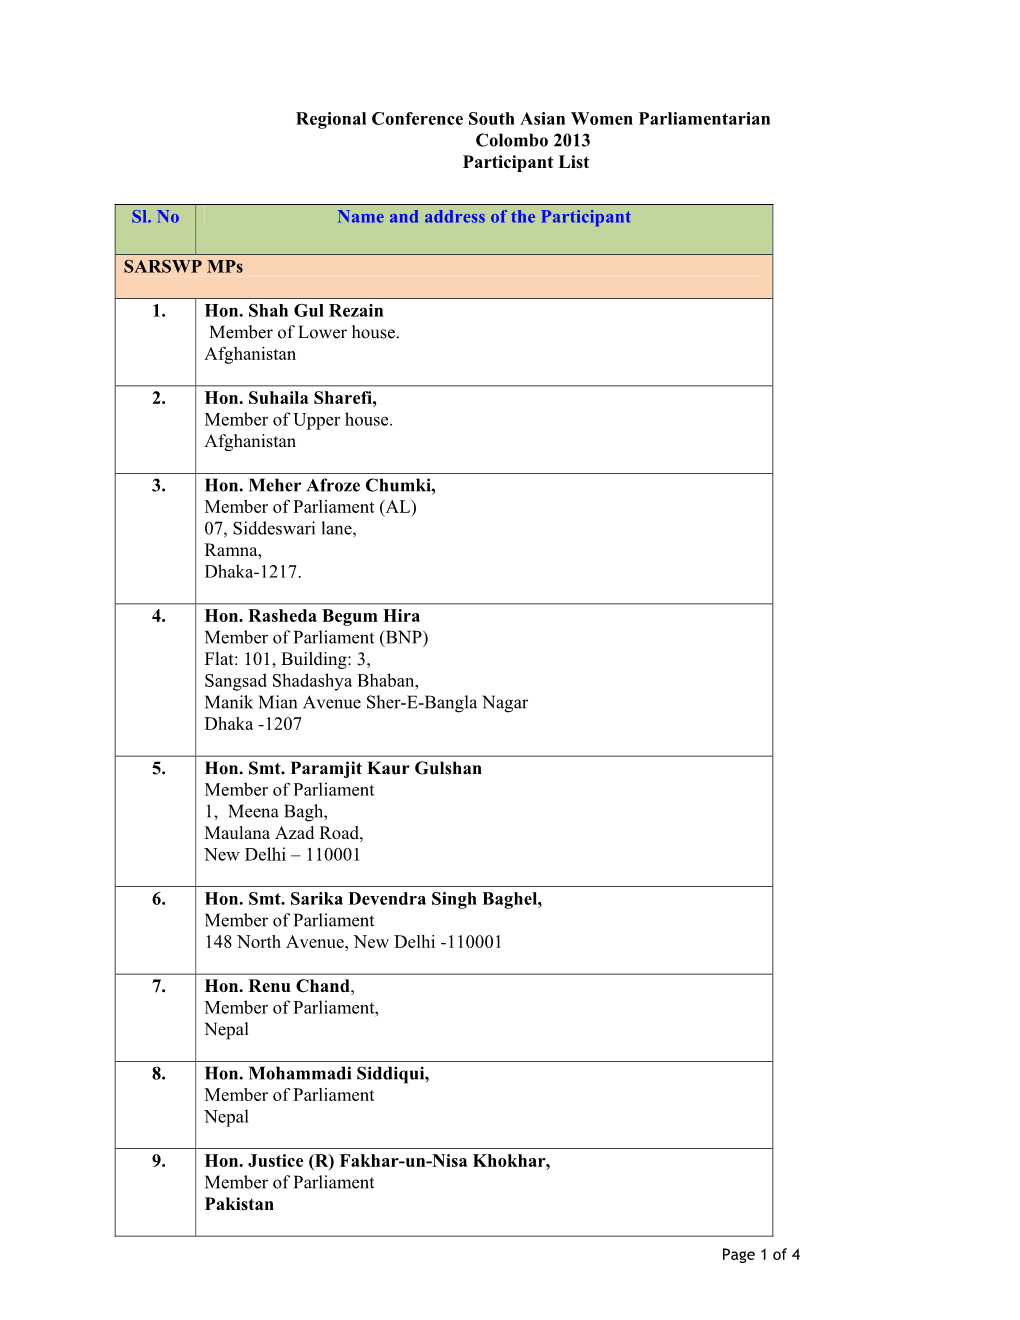 Regional Conference South Asian Women Parliamentarian Colombo 2013 Participant List